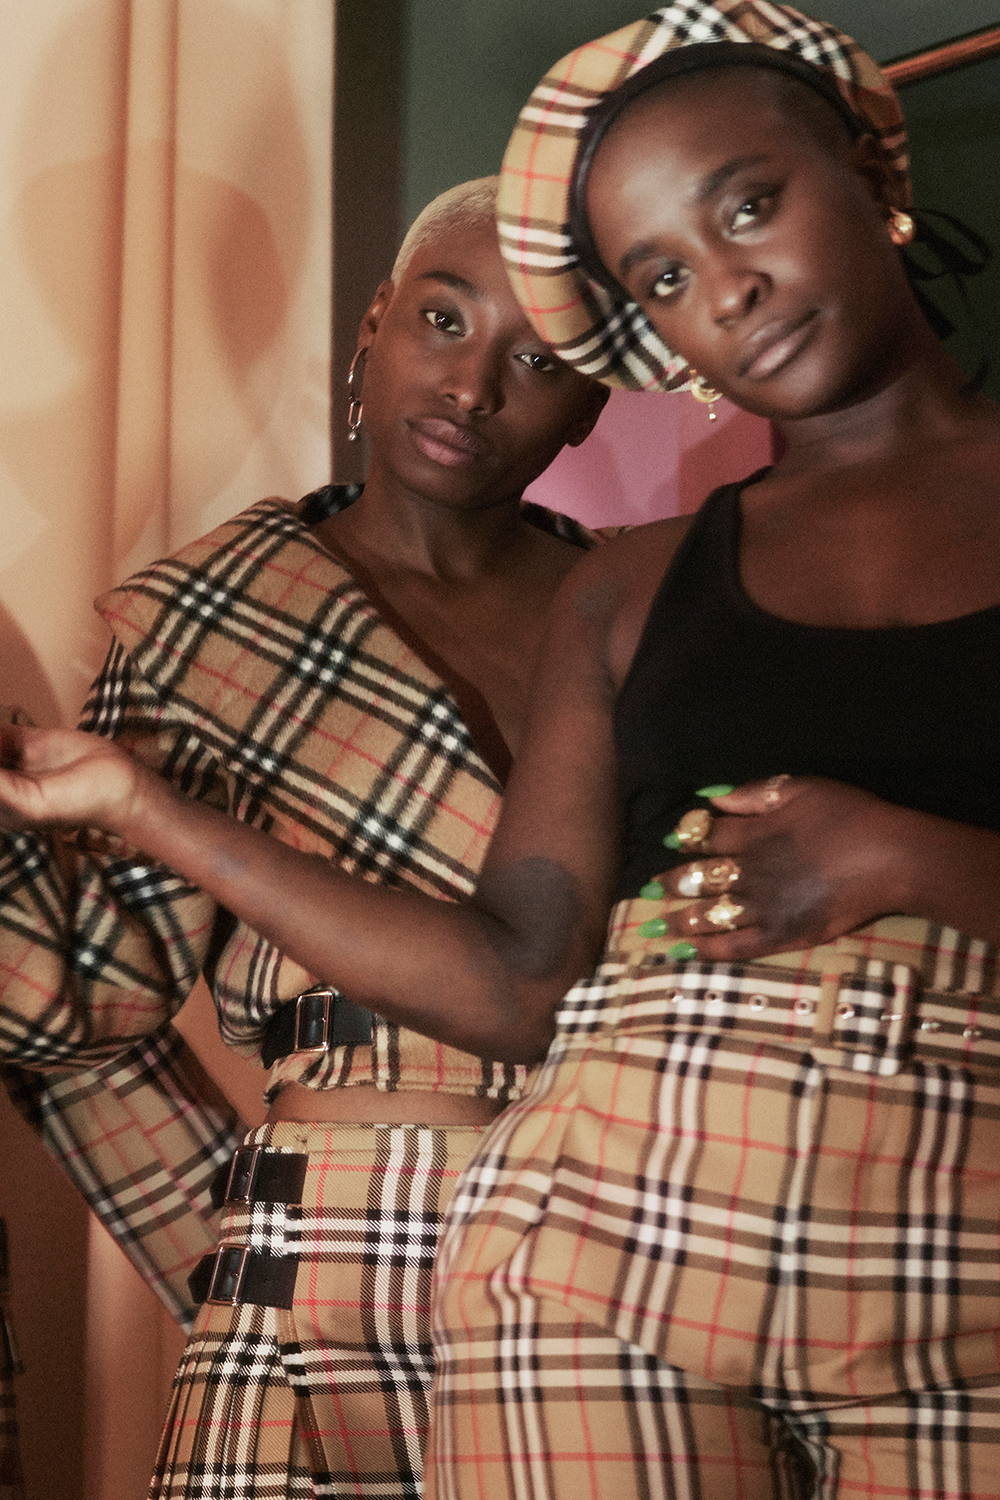 Burberry vintage check: Sistren wearing plaid pieces from the Vivienne Westwood collection